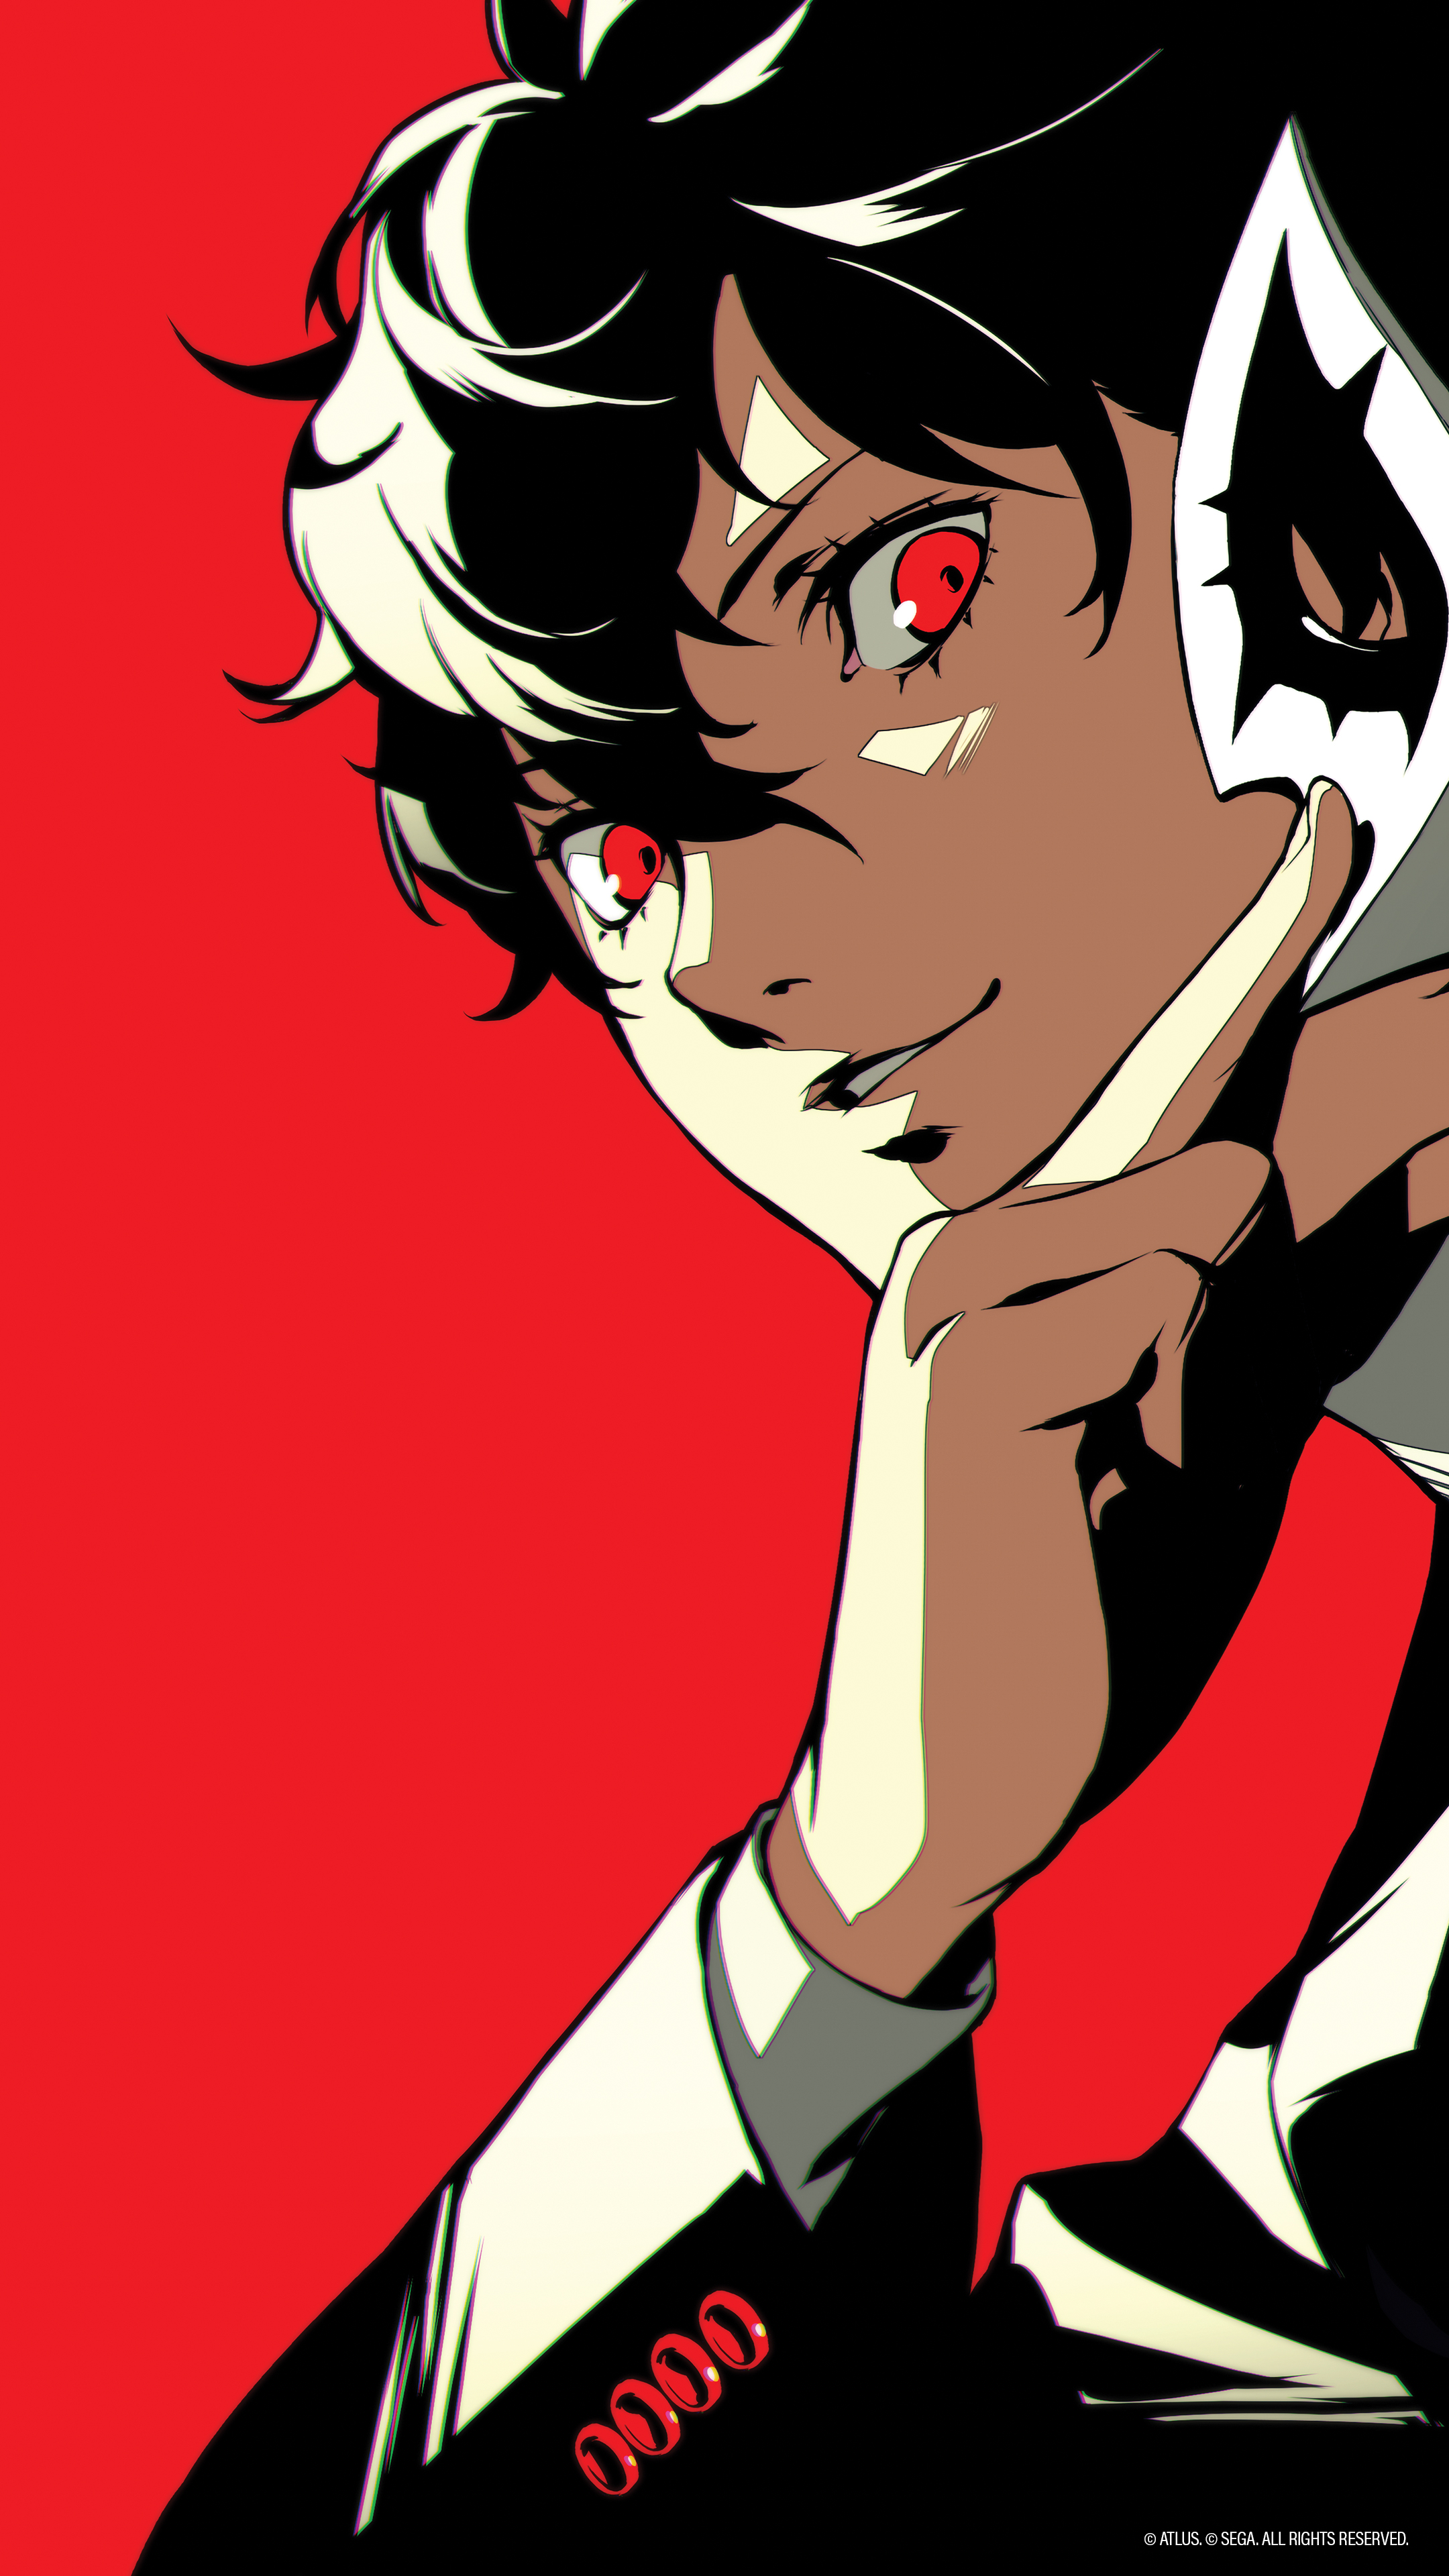 Persona 5 Joker character with red eyes on a striking red and black background for phone wallpaper.